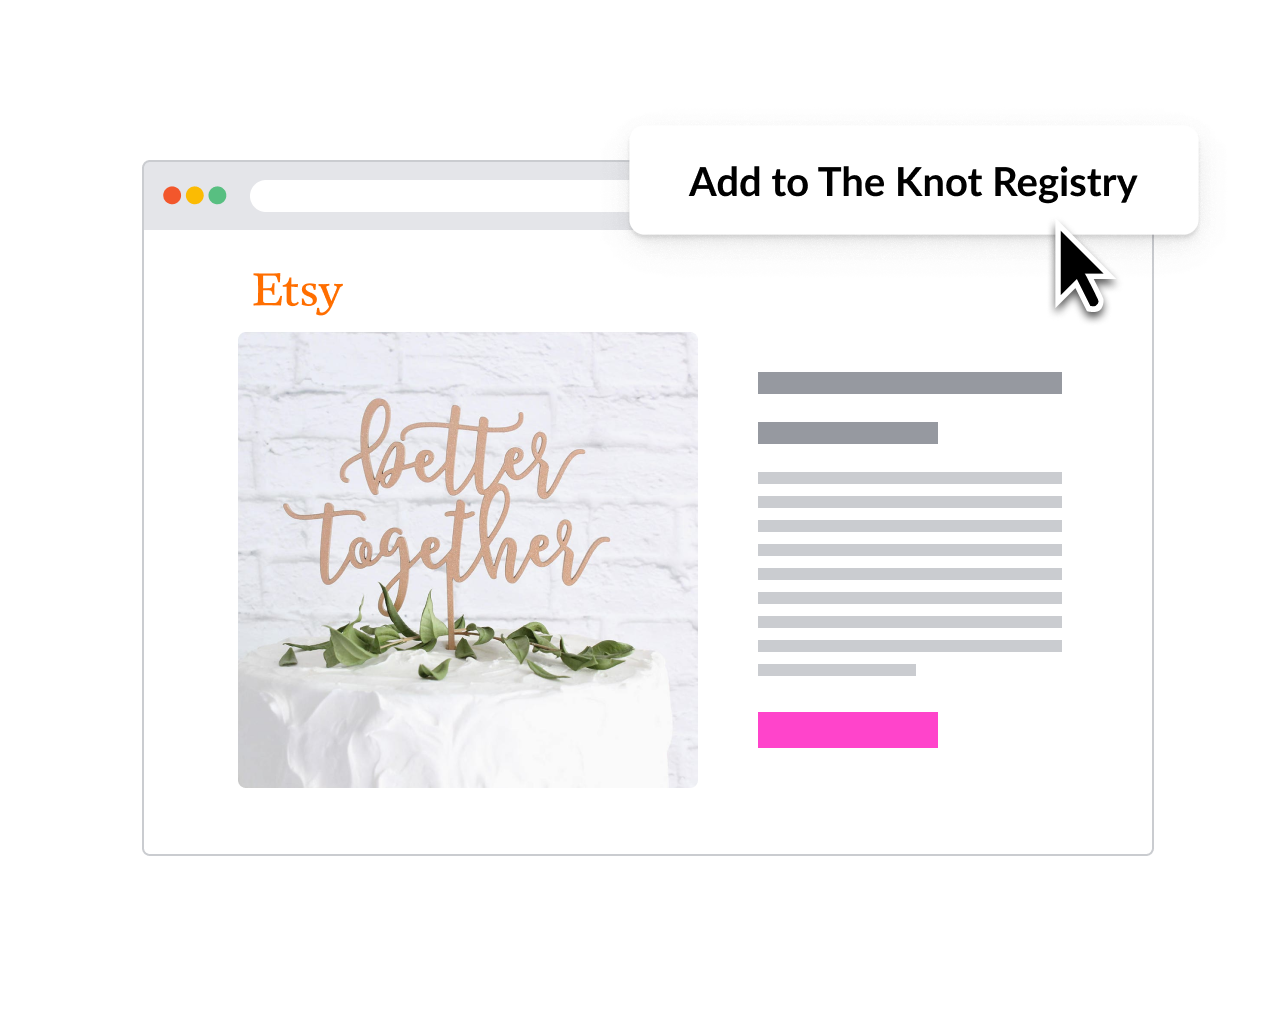 A cursor hovering over a button that says “Add to The Knot Registry” on an Etsy page.